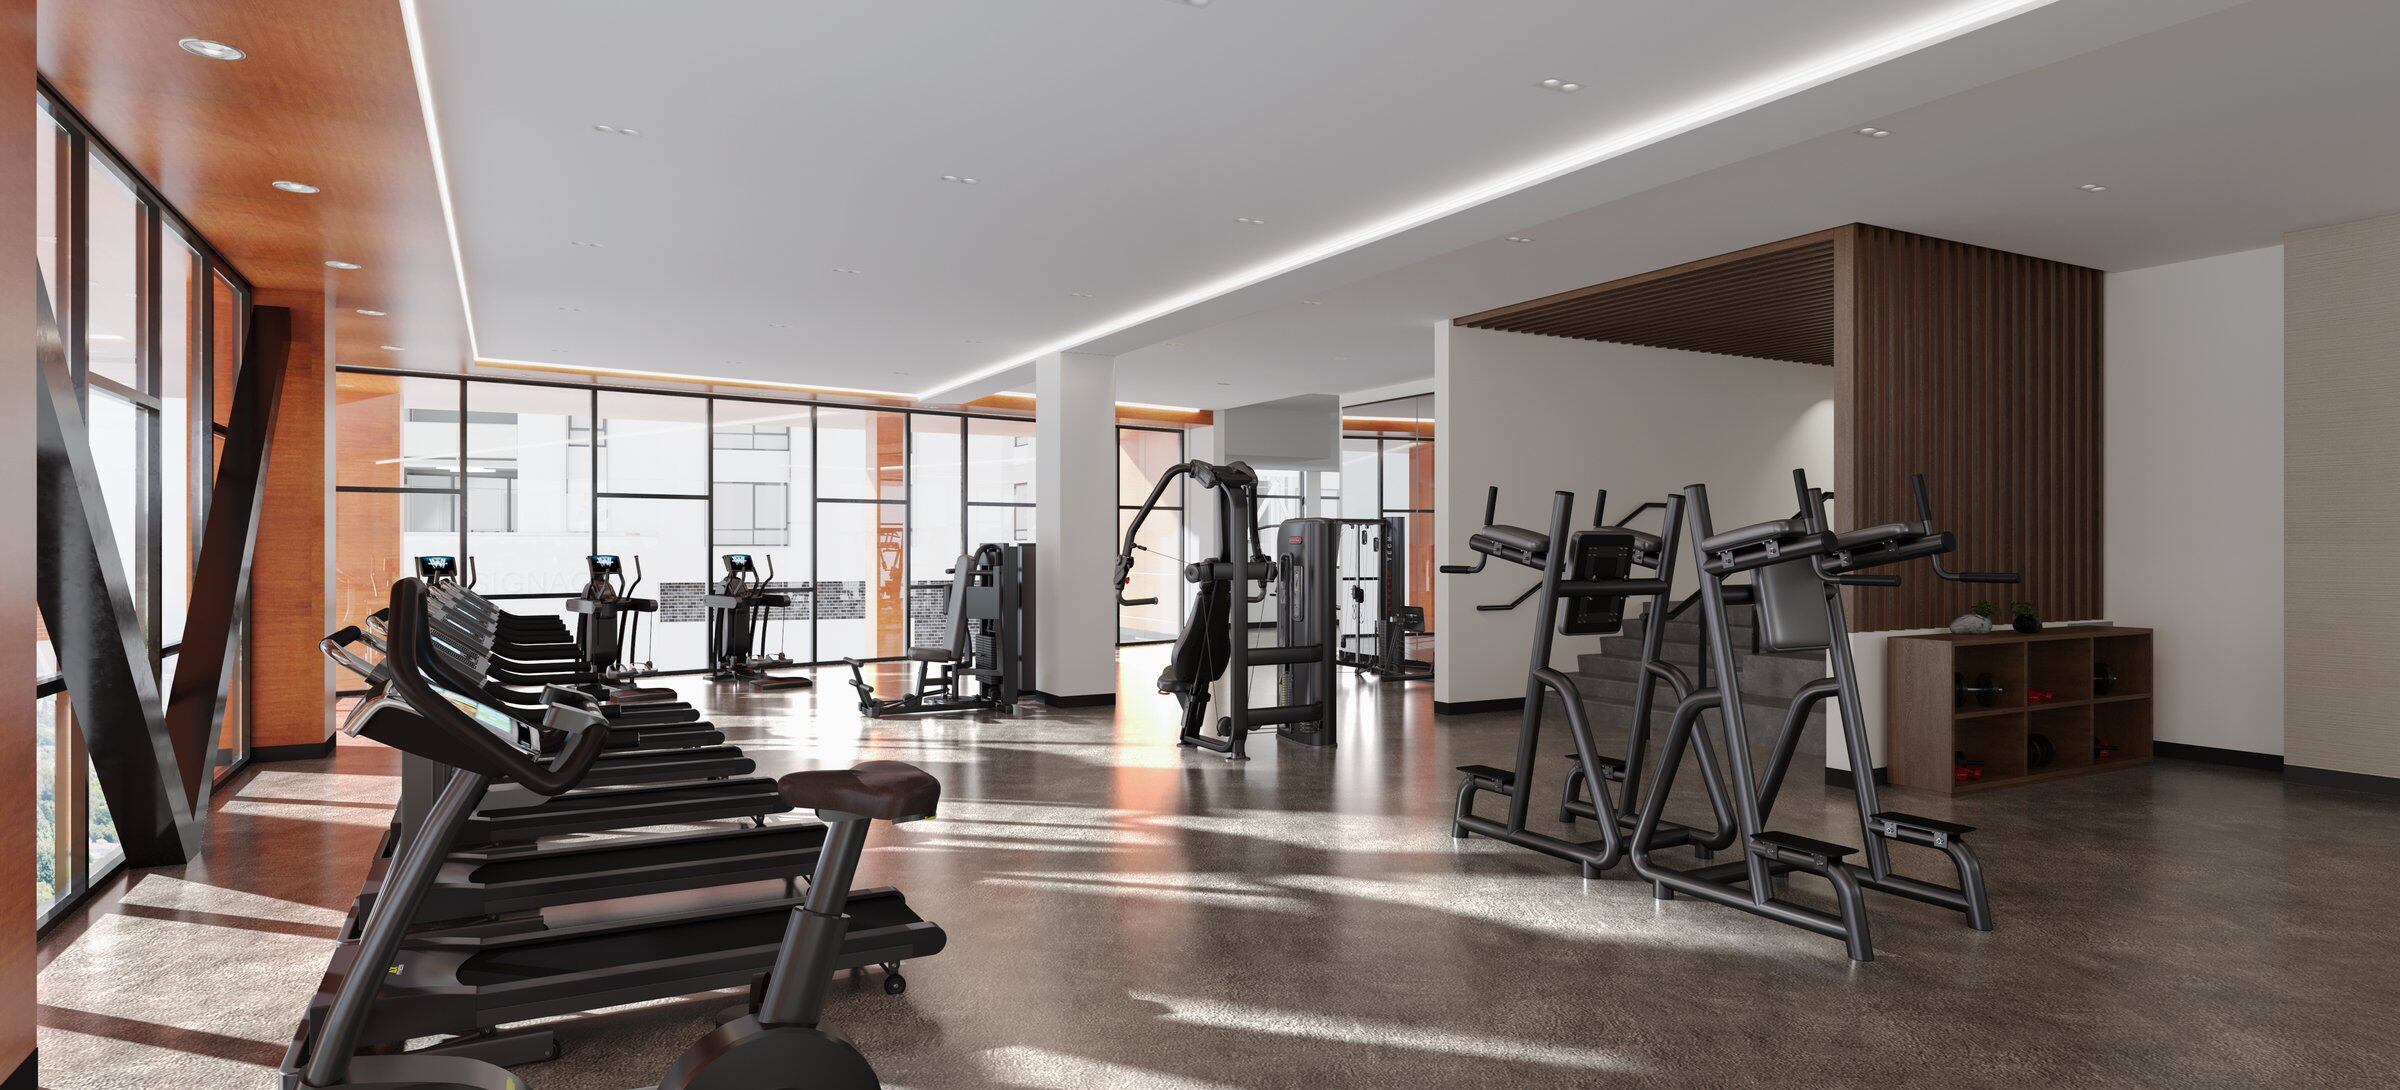 State-of-the-art fitness center (Rendering)